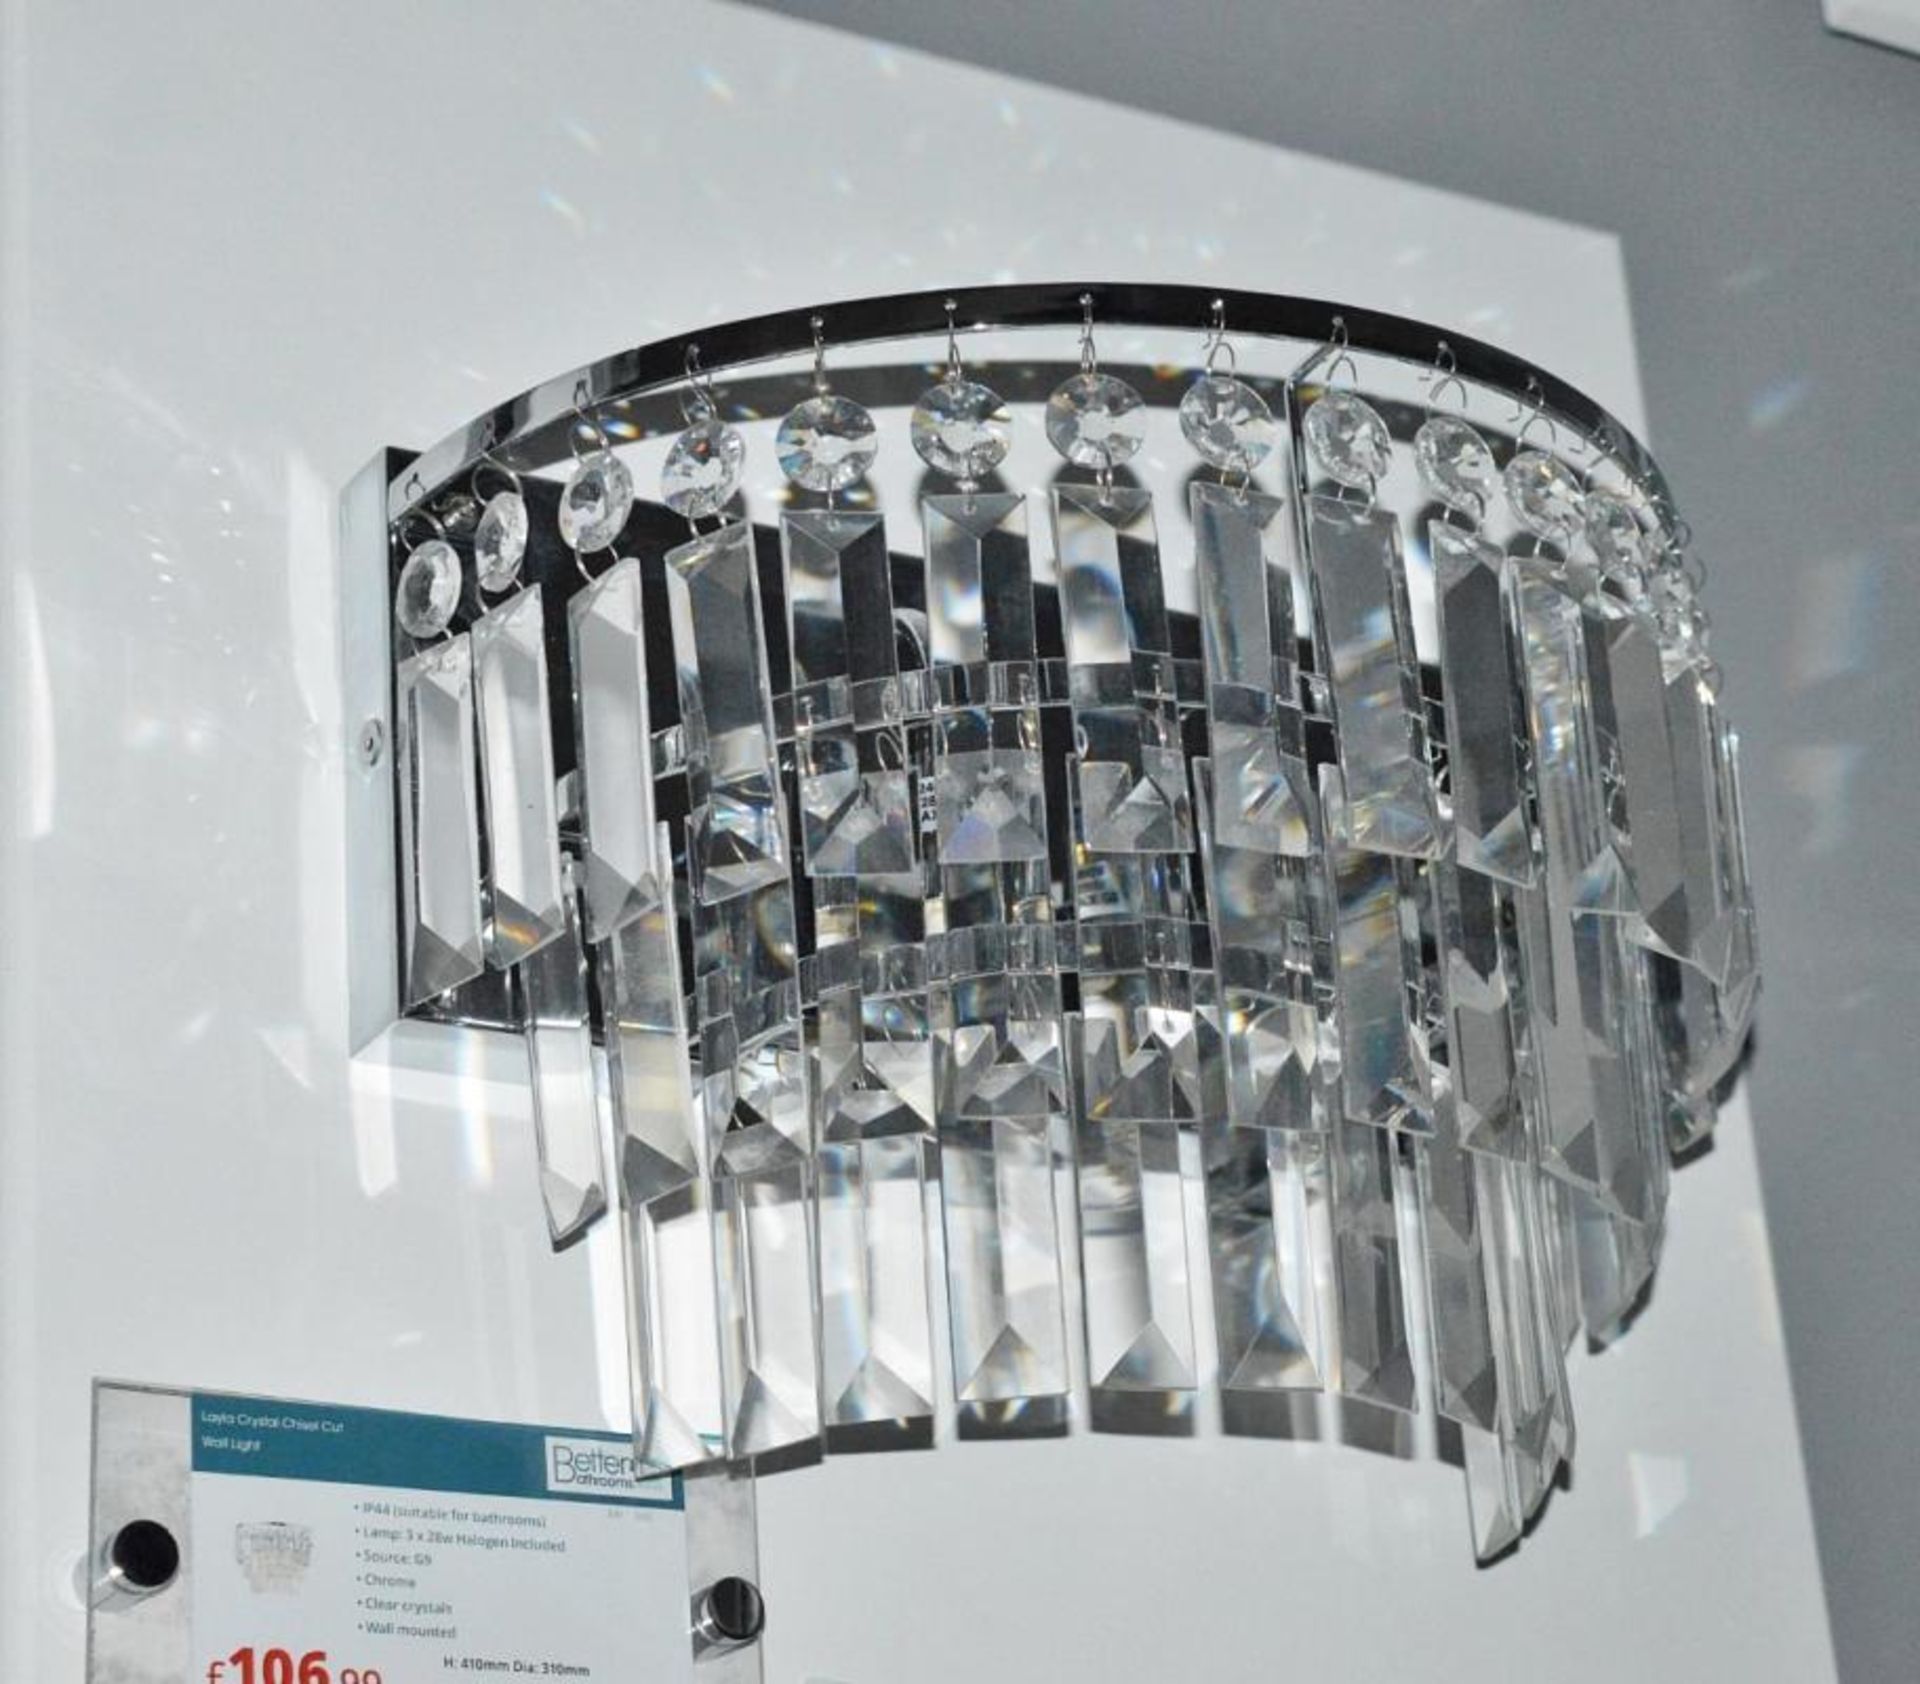 Layla Crystal Chiesal Wall Chandelier - Ex Display Stock - CL298 - Ref: J1159 - Location: Altrincham - Image 4 of 8